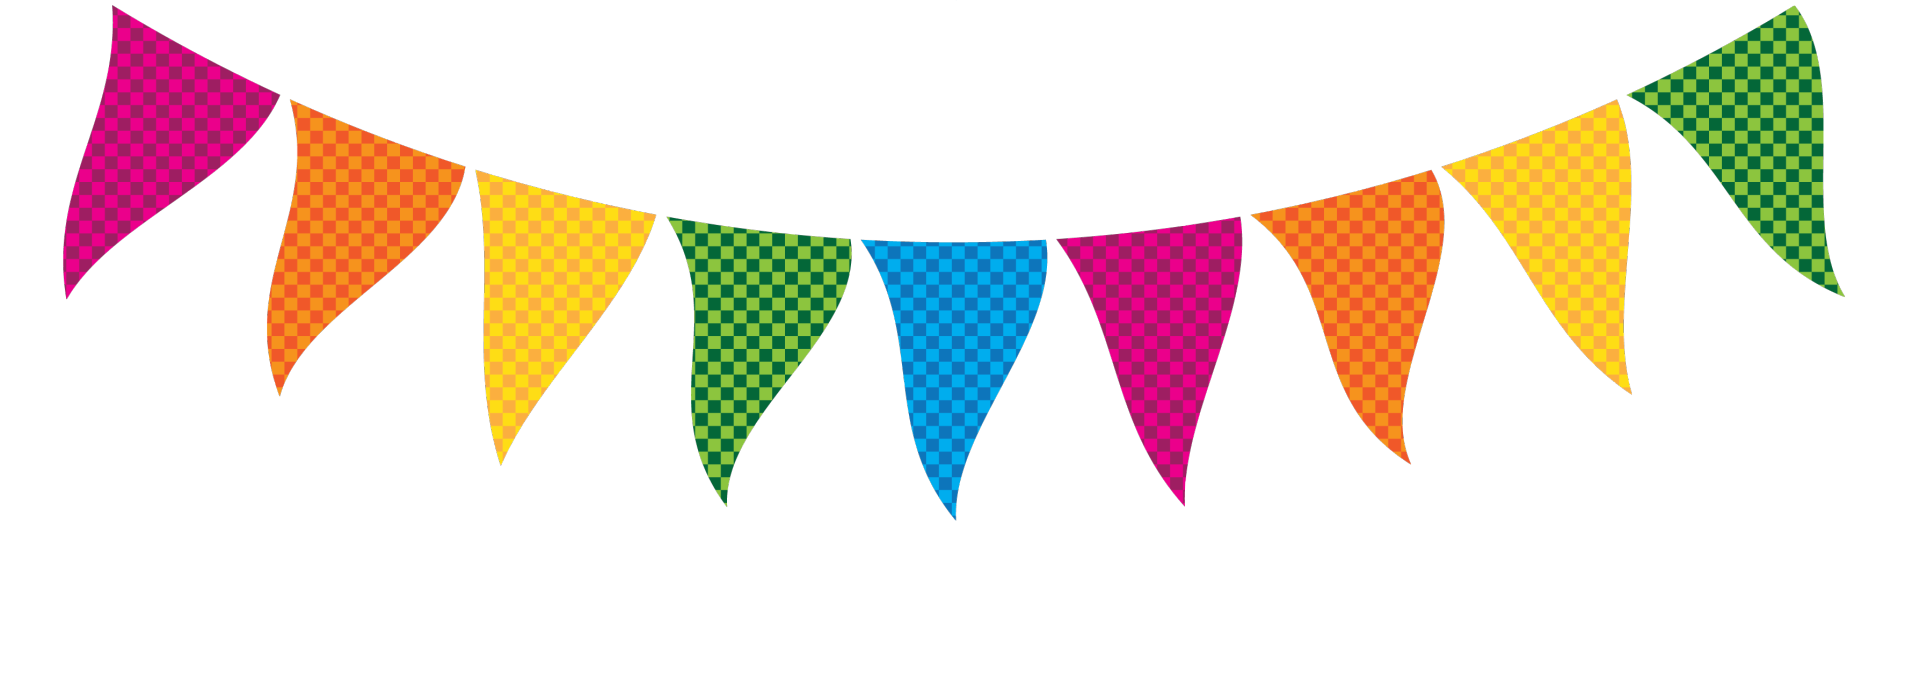 Party flags clipart 